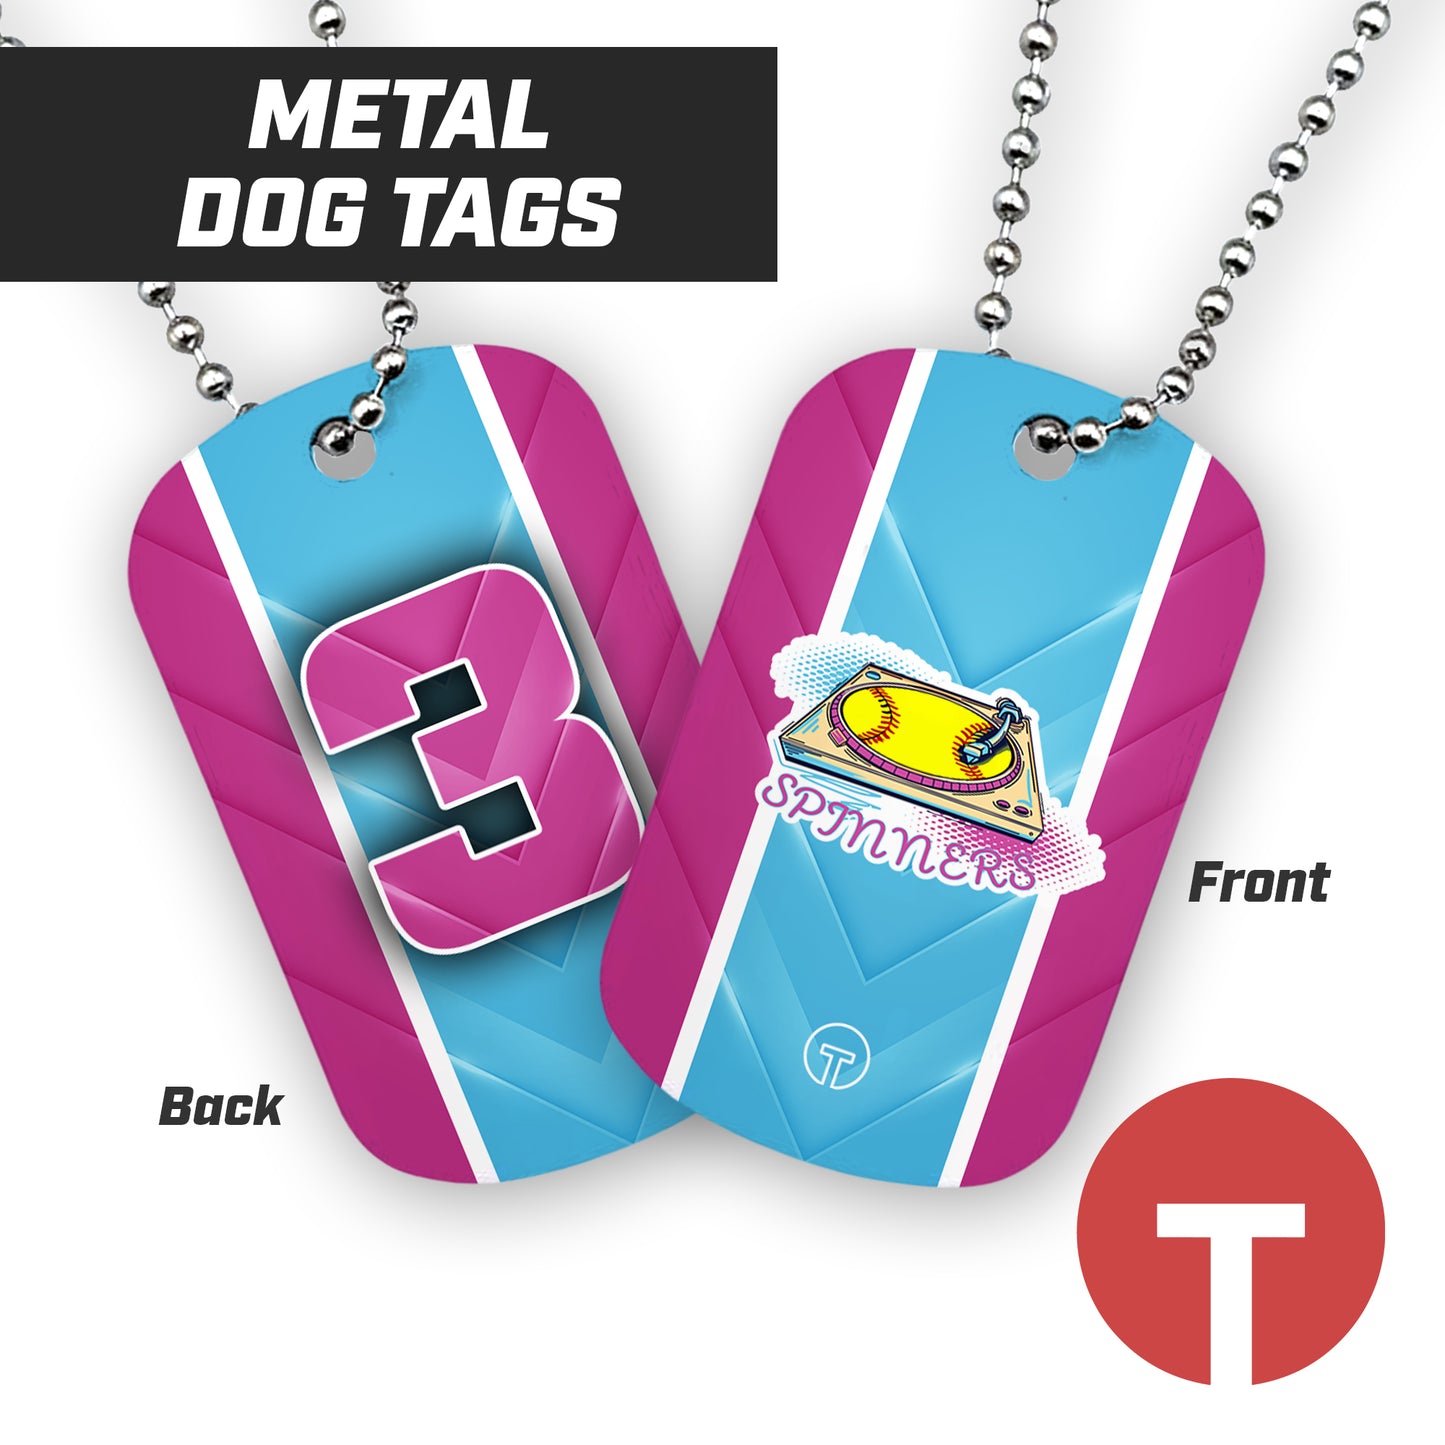 Spinners Softball - Double Sided Dog Tags